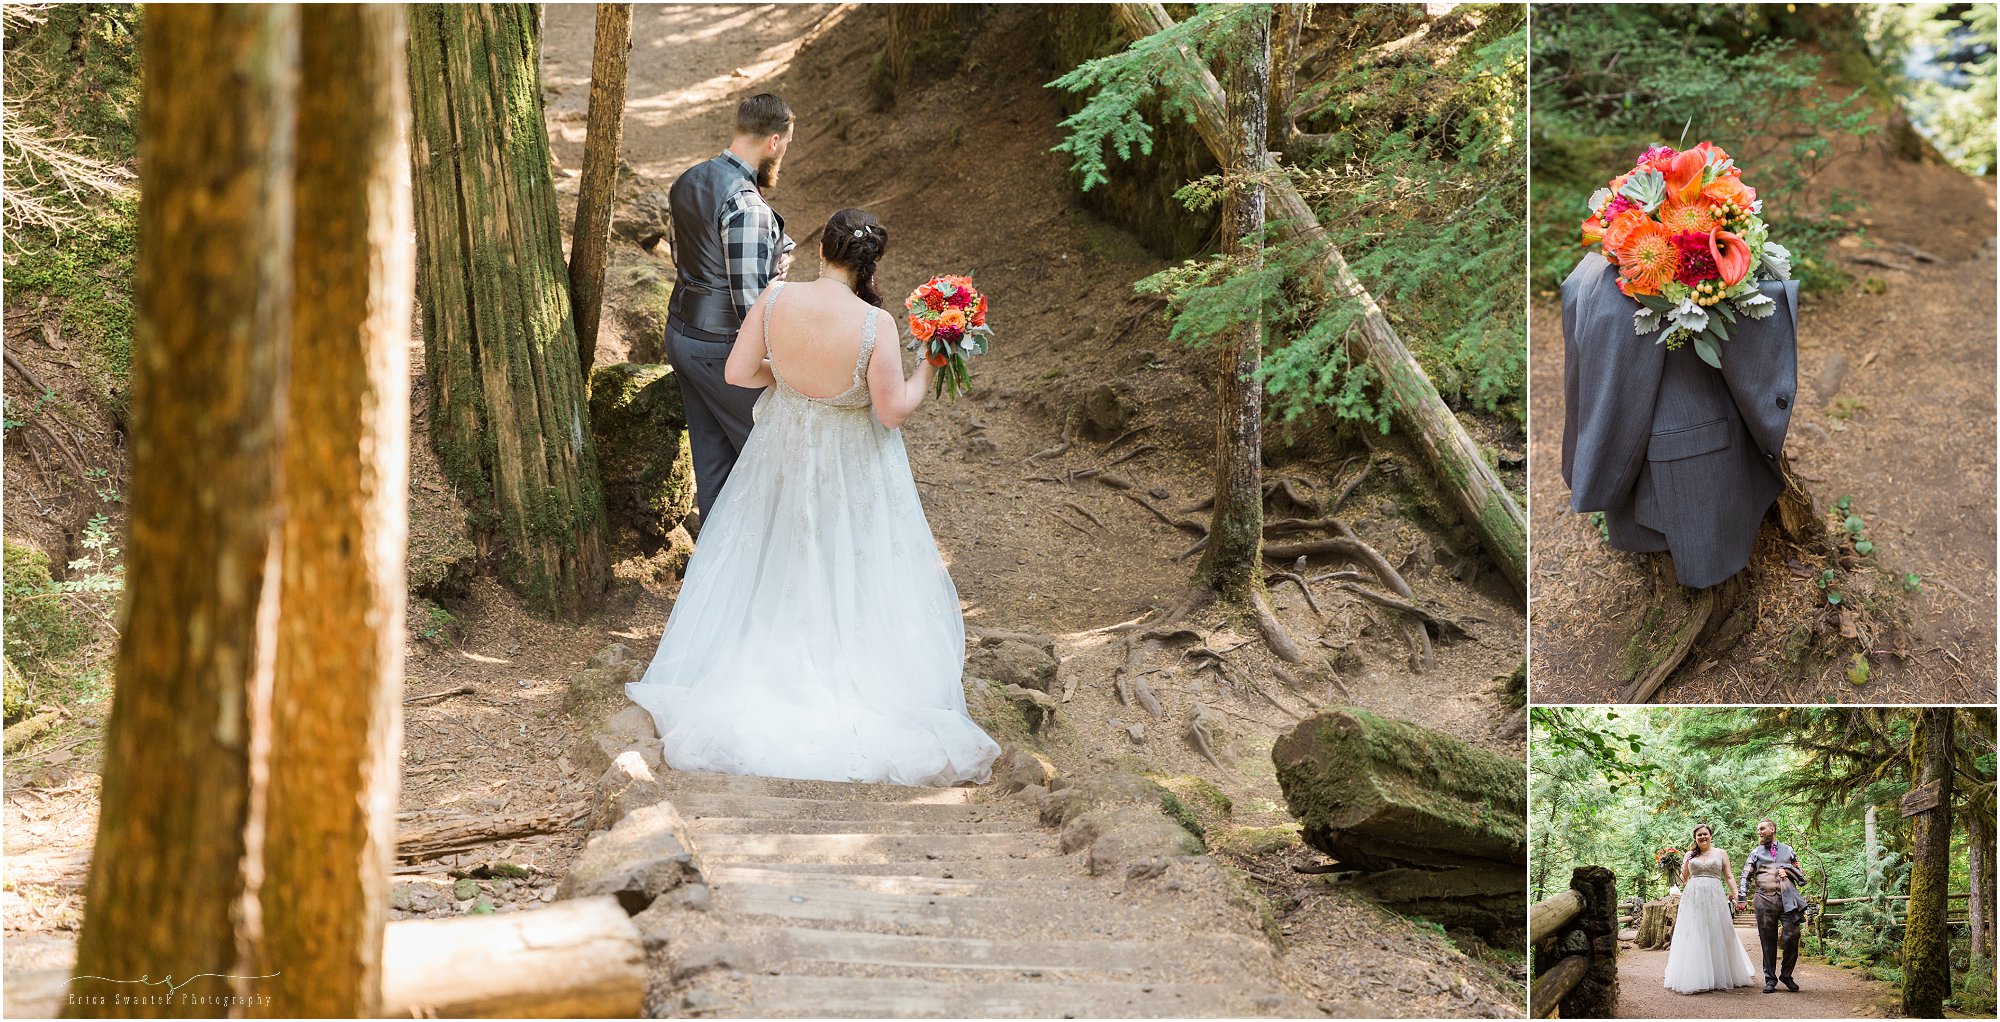 Navigating the trails at their waterfall wedding in Oregon for their formal wedding portraits. | Erica Swantek Photography